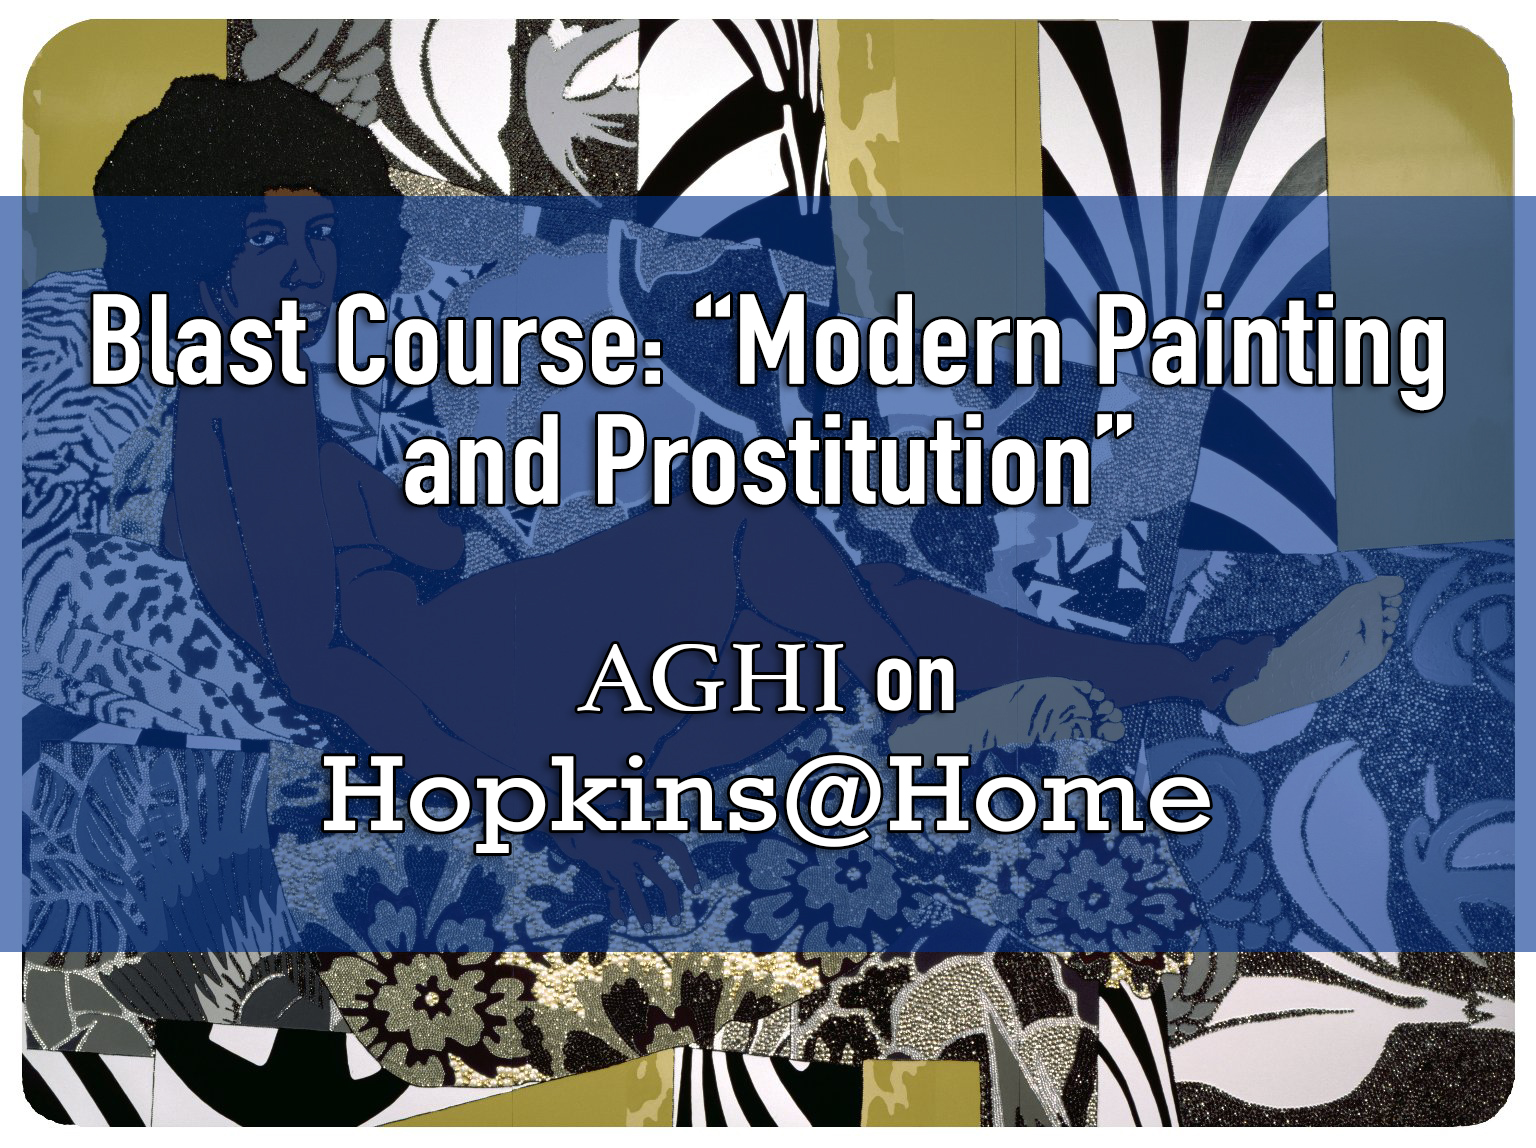 Blast Course: “Modern Painting and Prostitution”